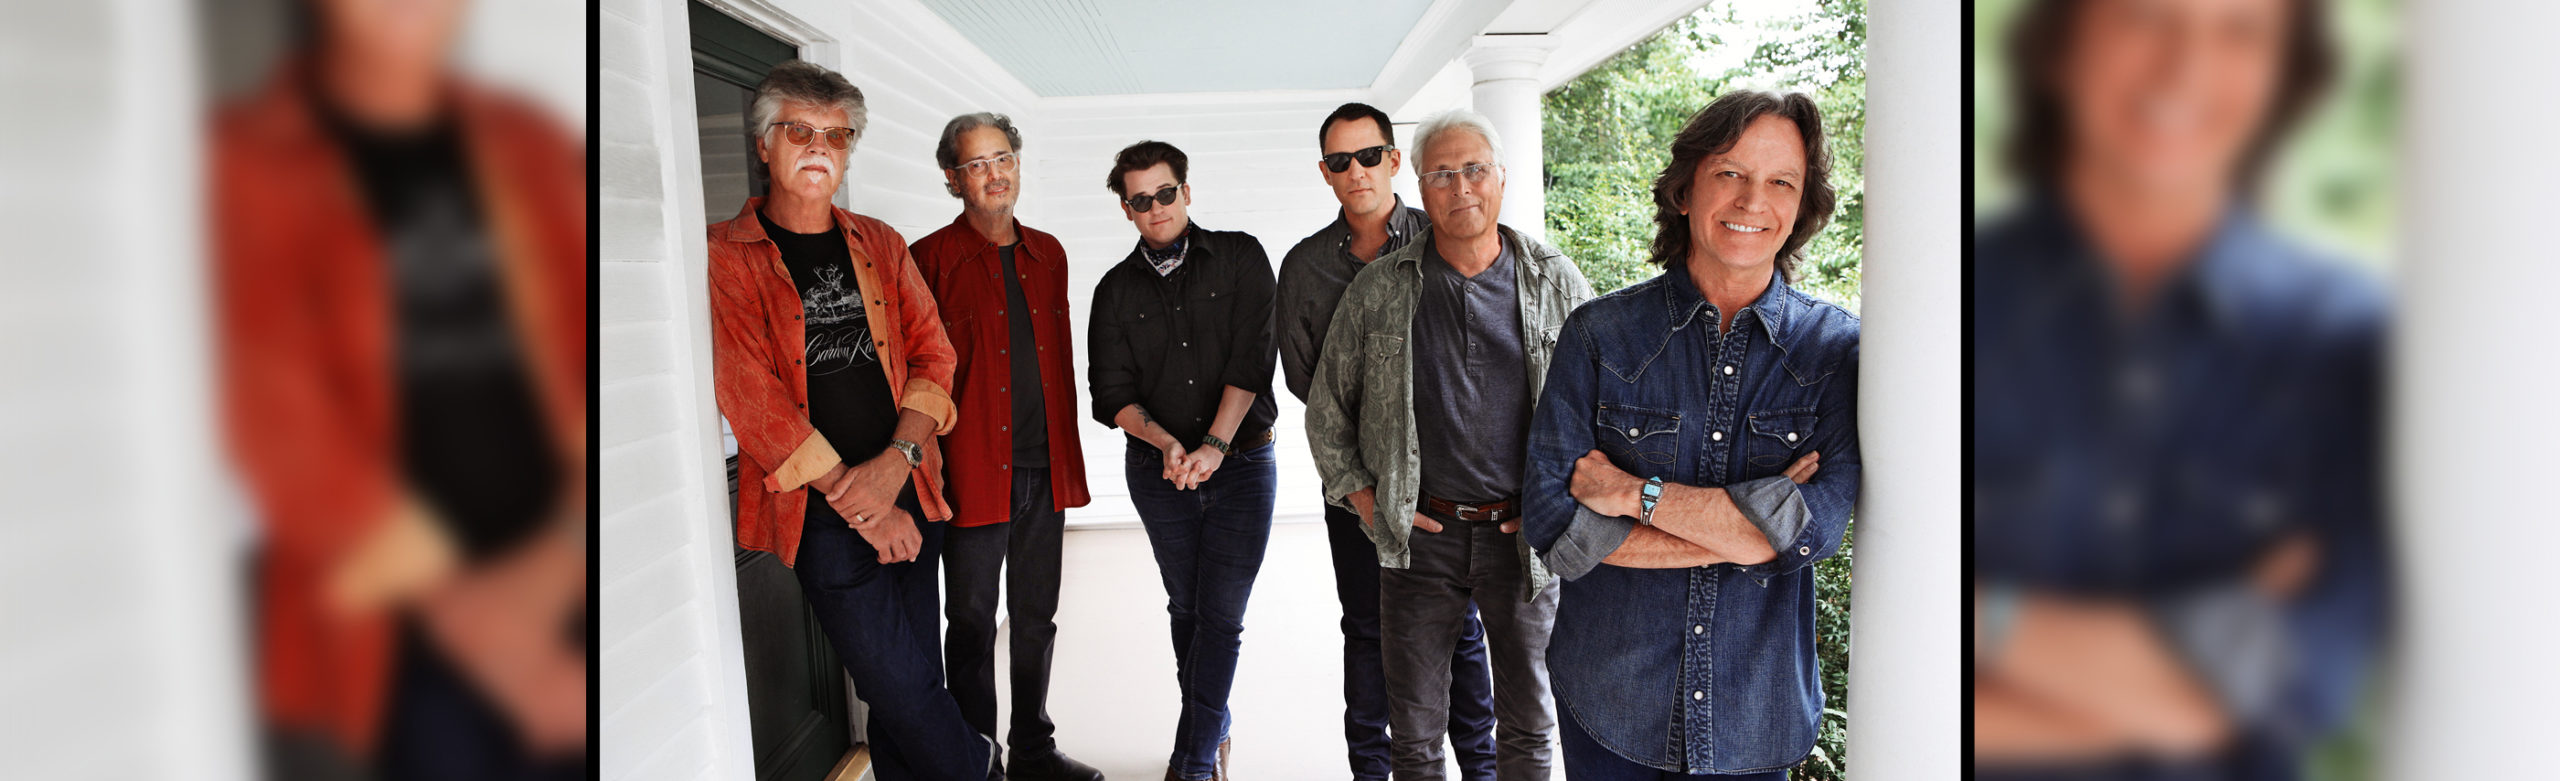 Platinum Selling Classic Country: Nitty Gritty Dirt Band to Headline Missoula Concert Image